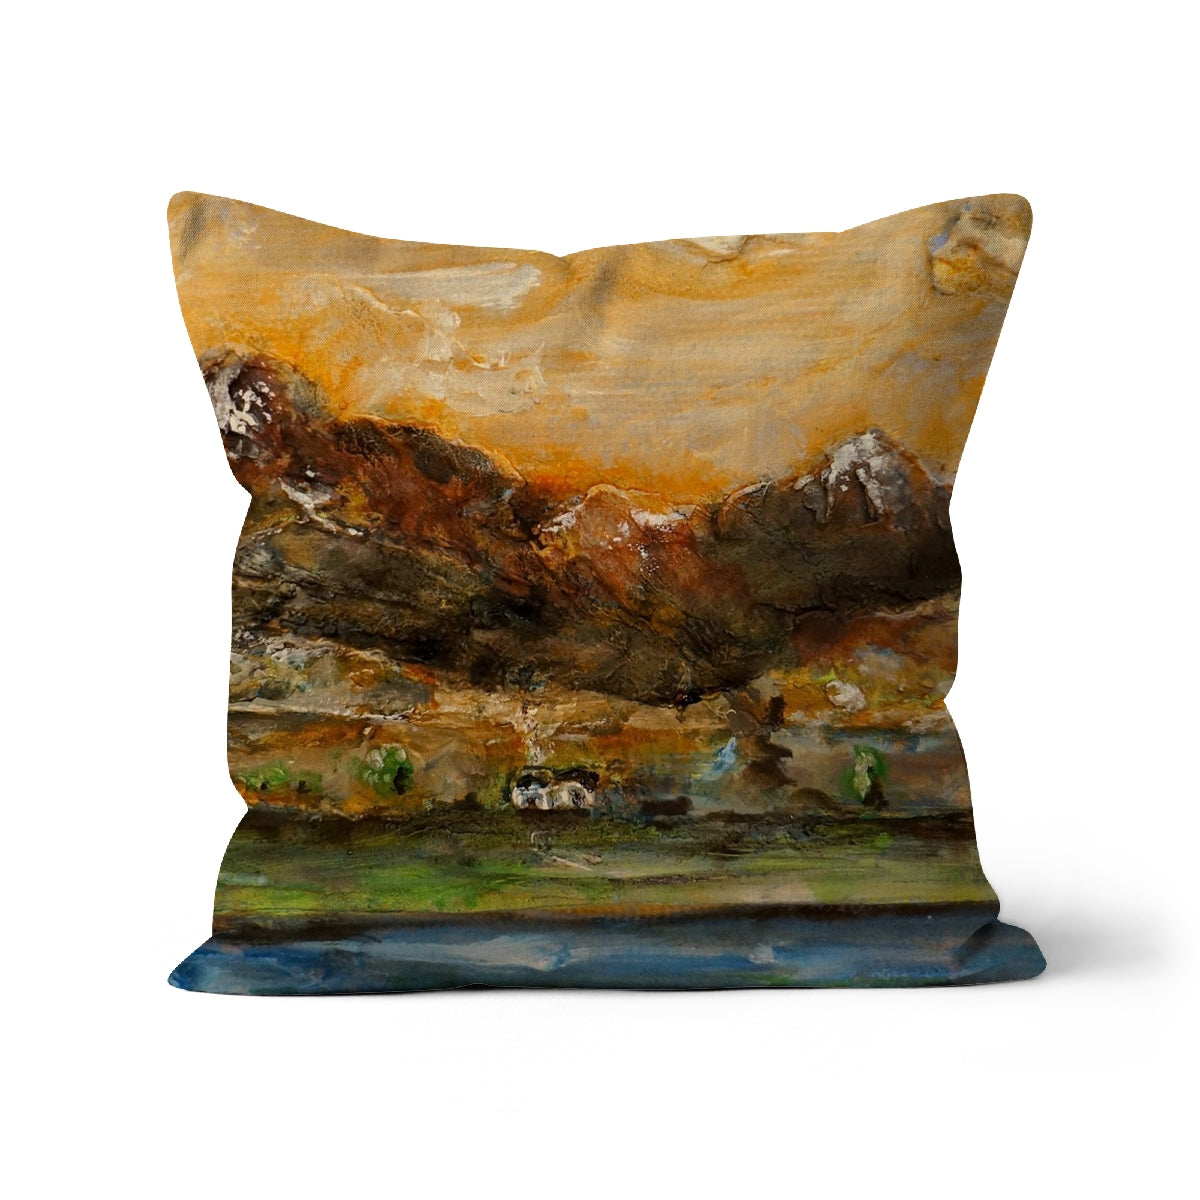 A Glencoe Cottage Art Gifts Cushion-Cushions-Glencoe Art Gallery-Faux Suede-18"x18"-Paintings, Prints, Homeware, Art Gifts From Scotland By Scottish Artist Kevin Hunter